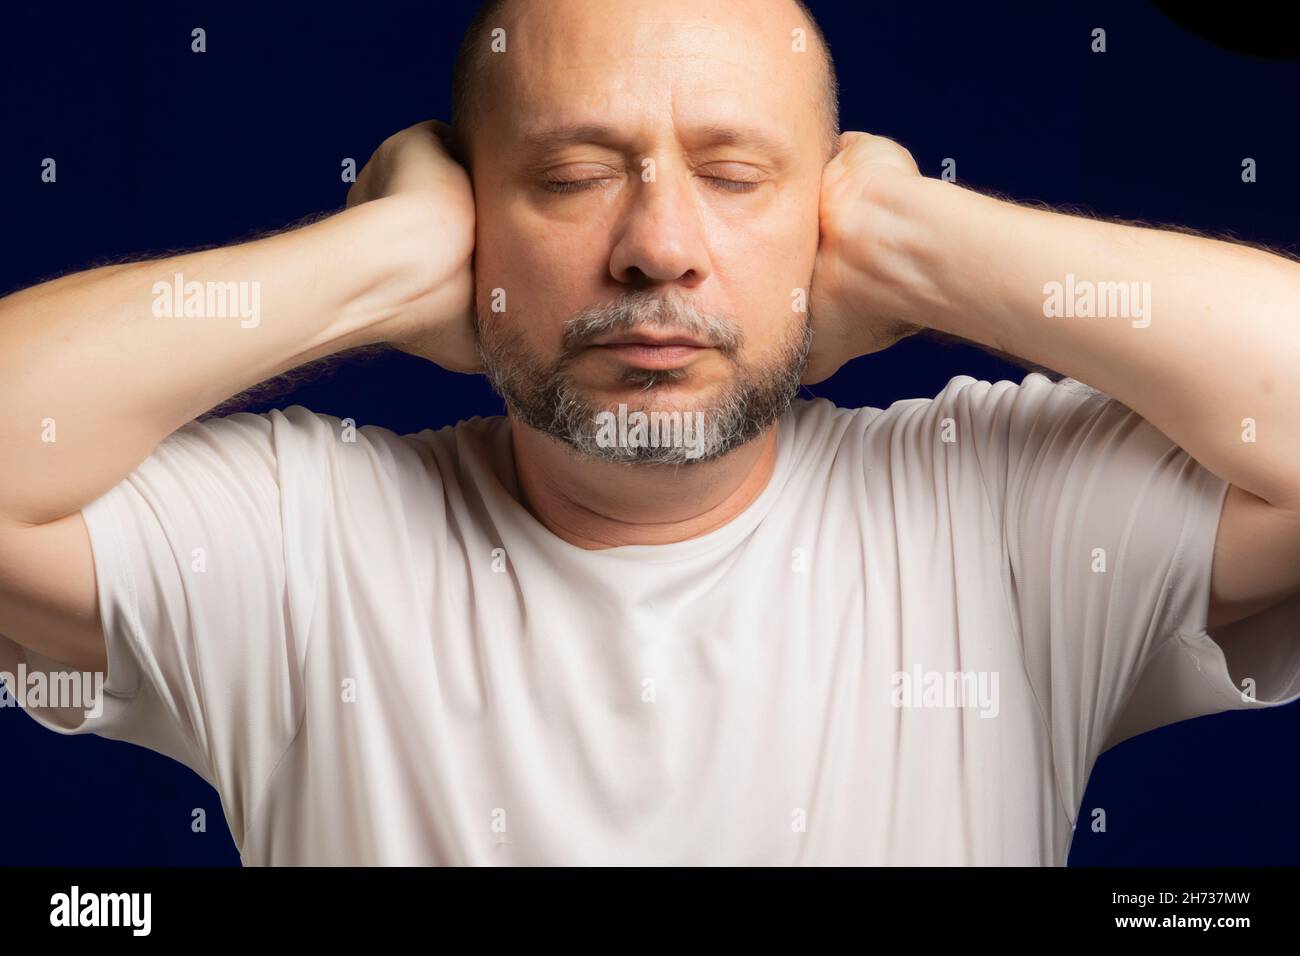 Person with hands on ears against dark blue background. Salvador, Bahia, Brazil. Stock Photo